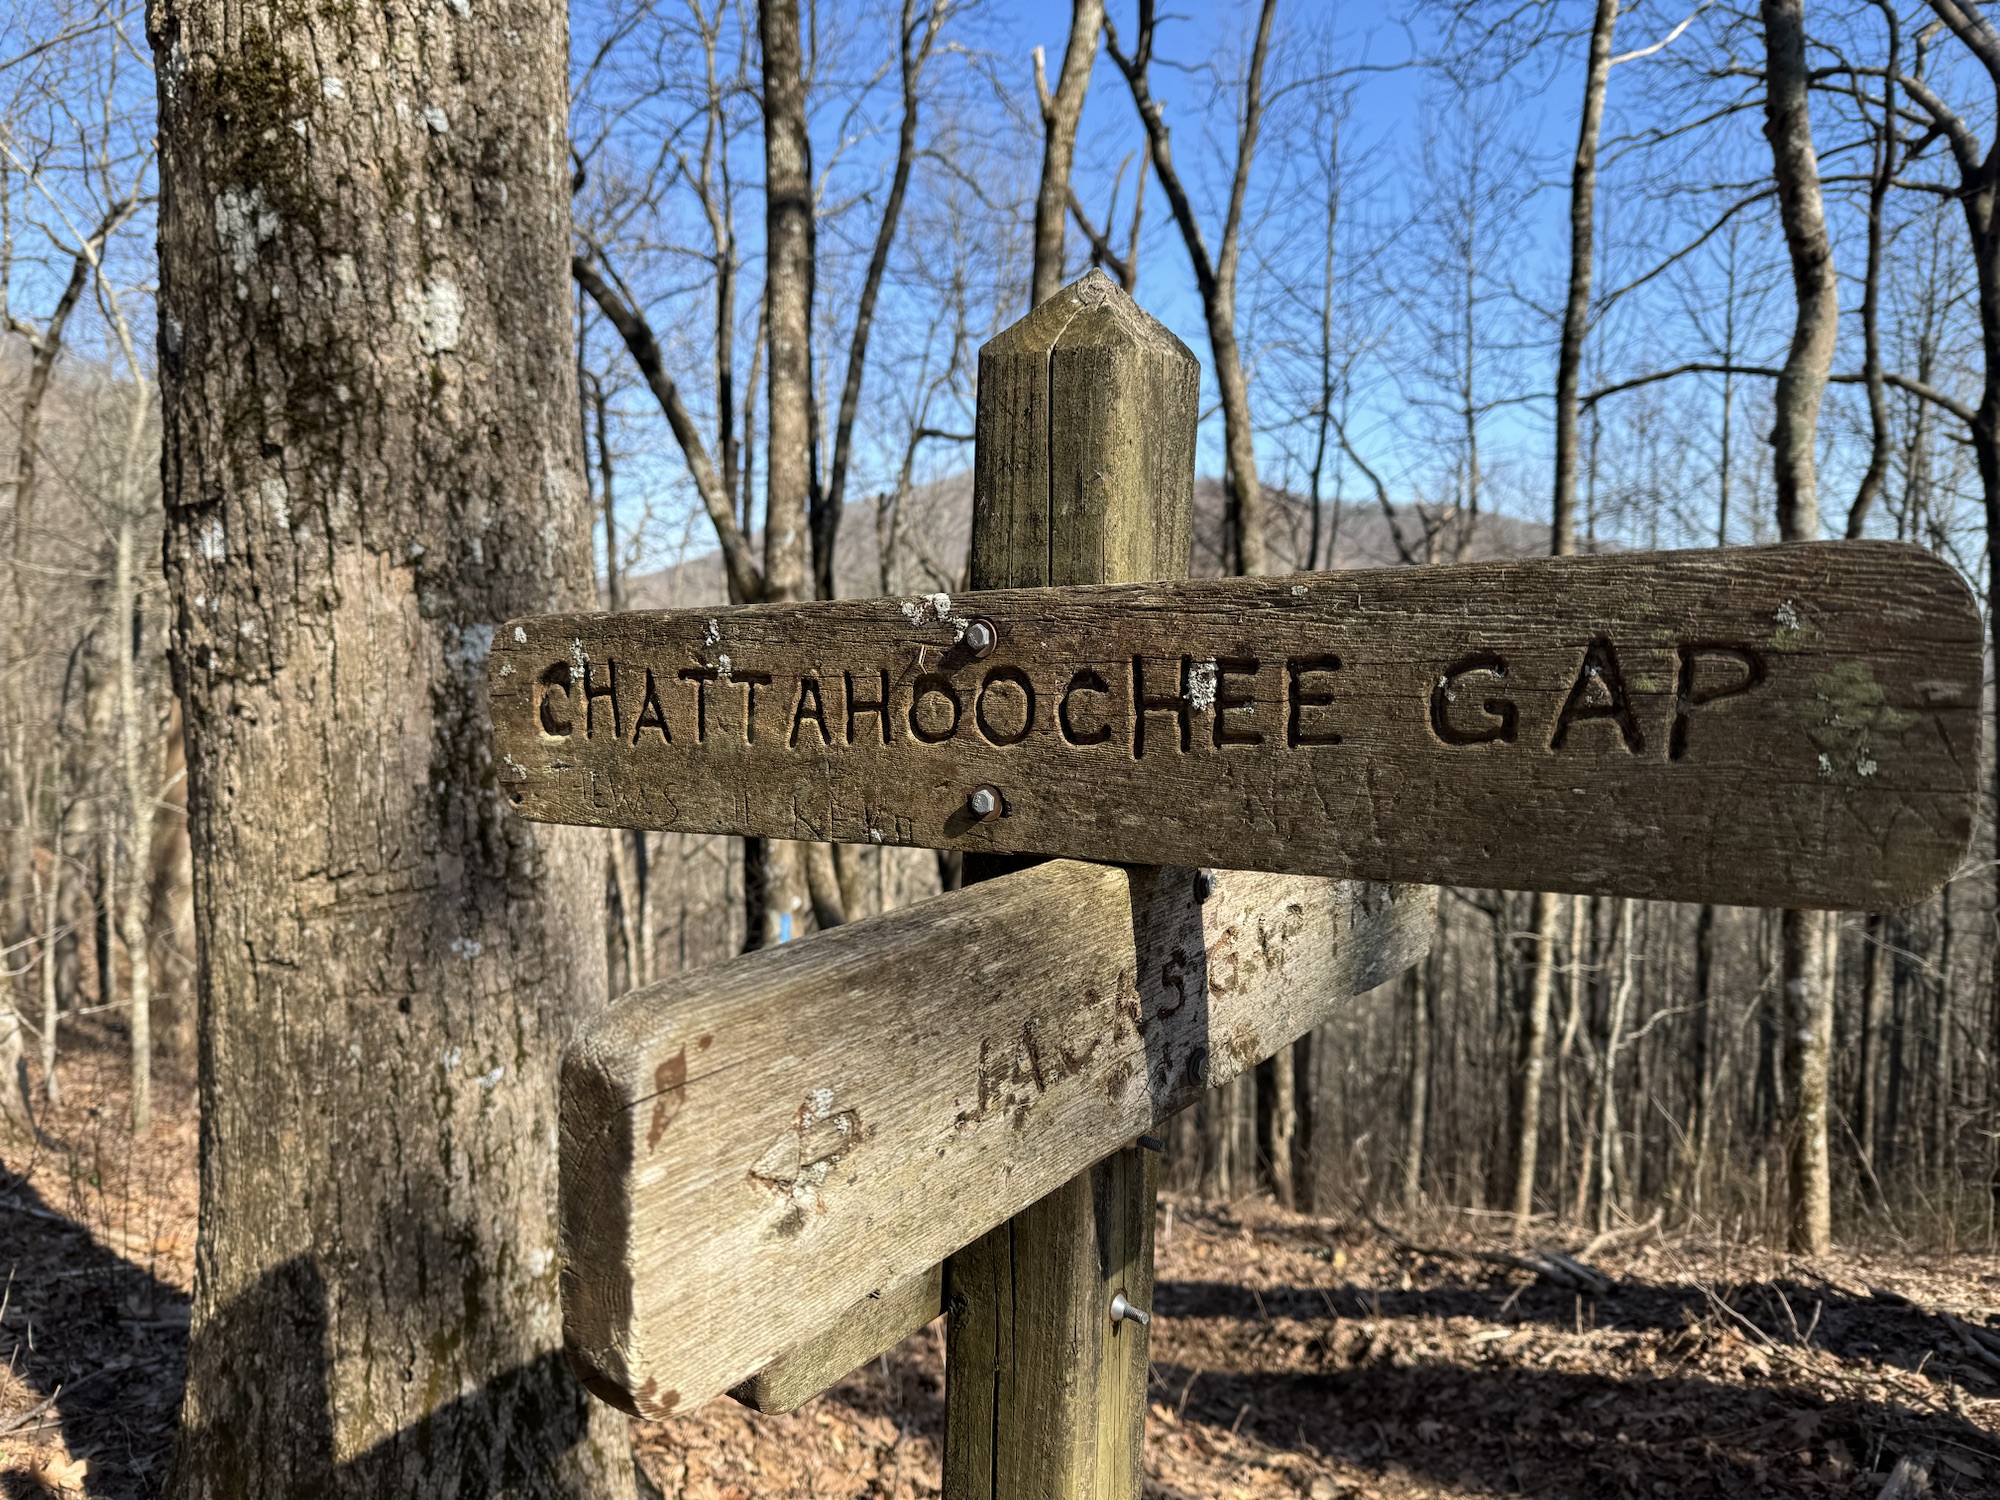 Day 4 – Baggs Creek Gap to a back country camping site about 1.7 north of Chattahoochie Gap